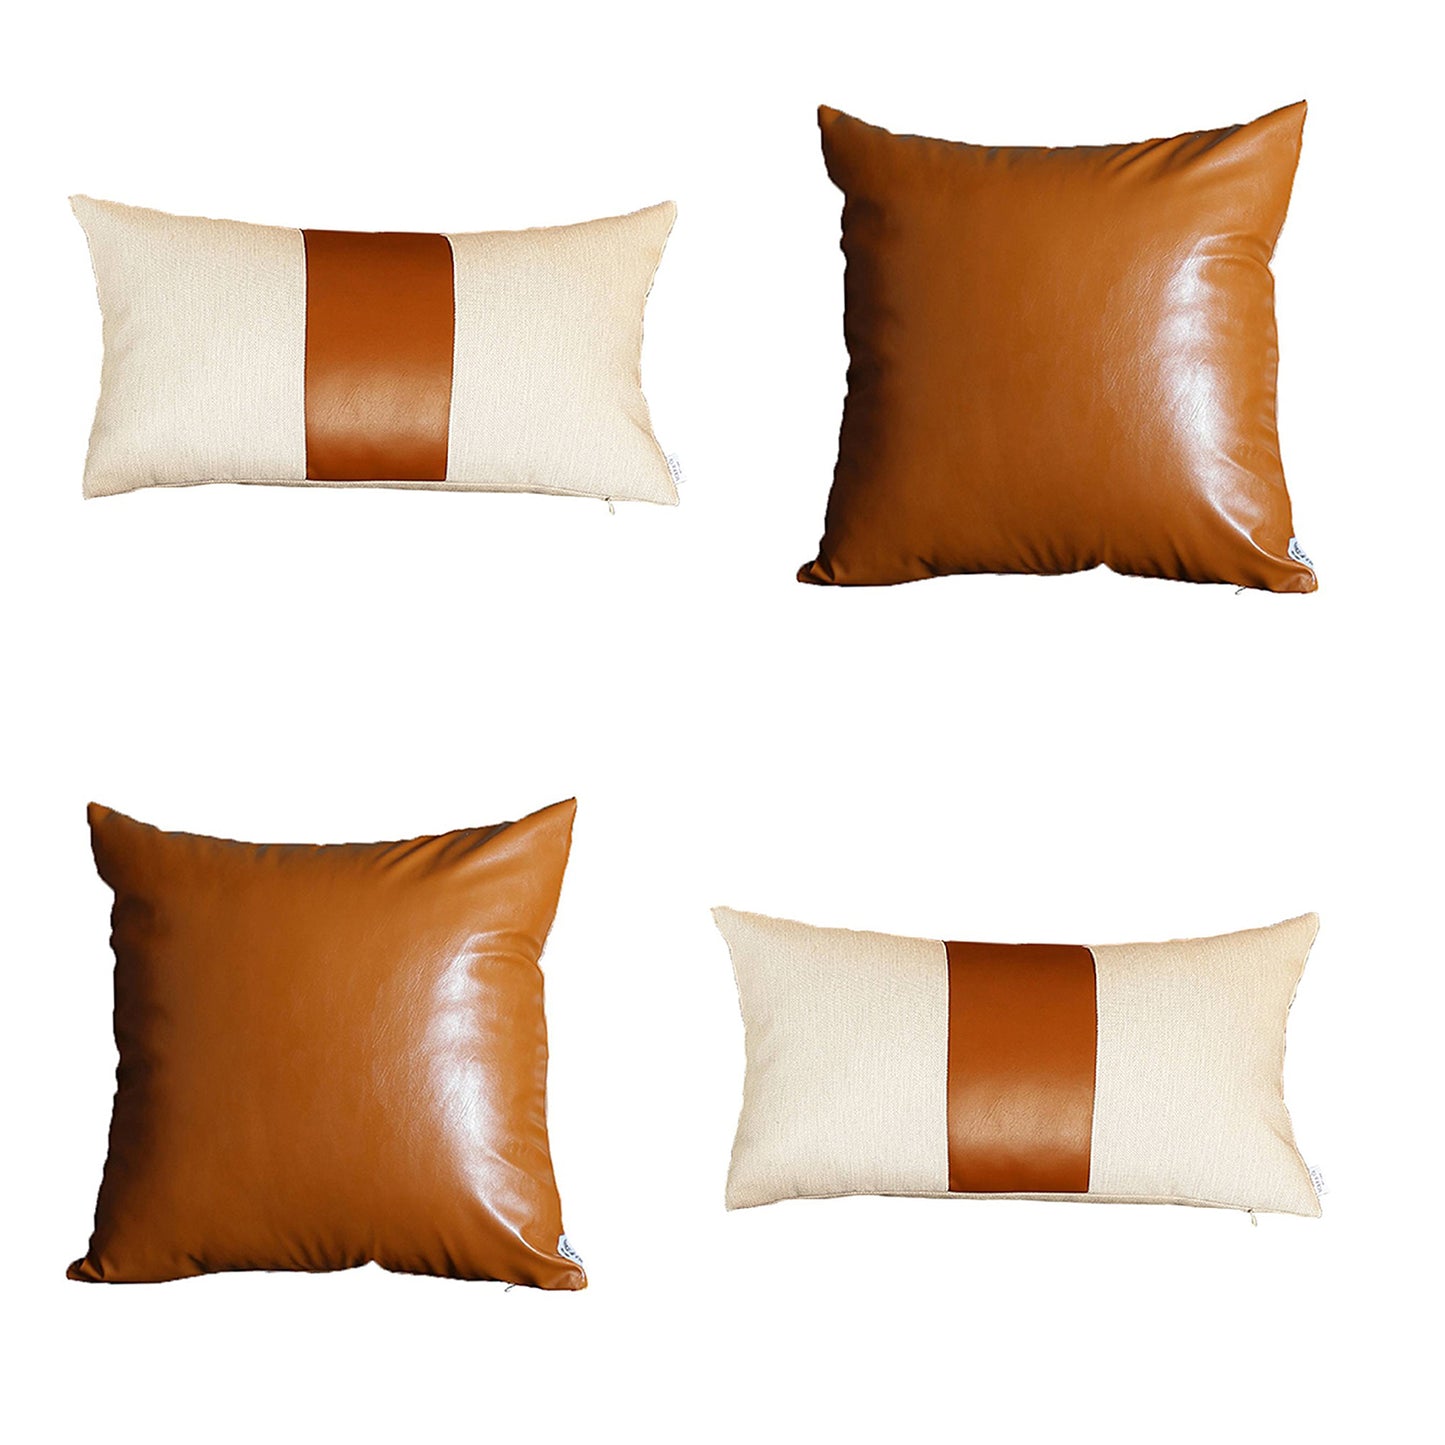 Boho Throw Pillow Brown Mixed Design Set of 4 Vegan Faux Leather Solid for Couch, Bedding